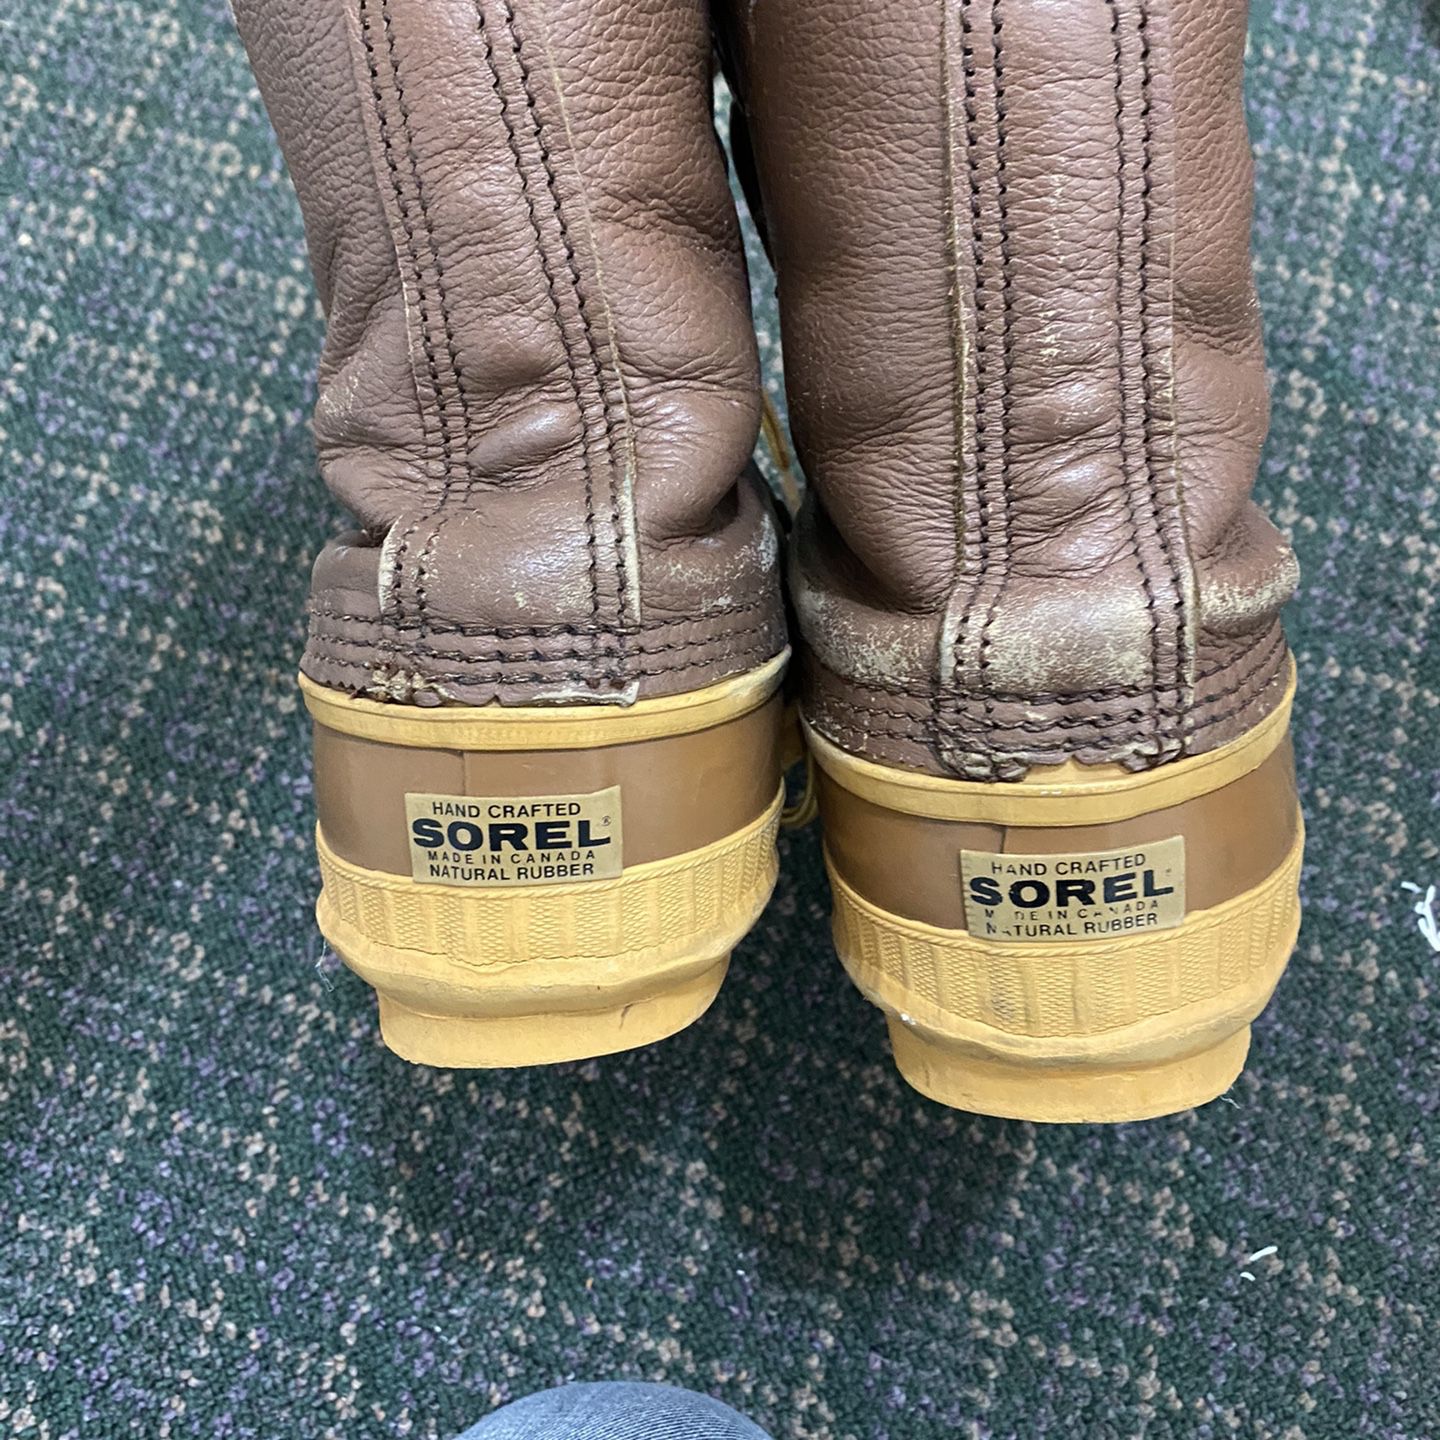 Snowmobile Boots